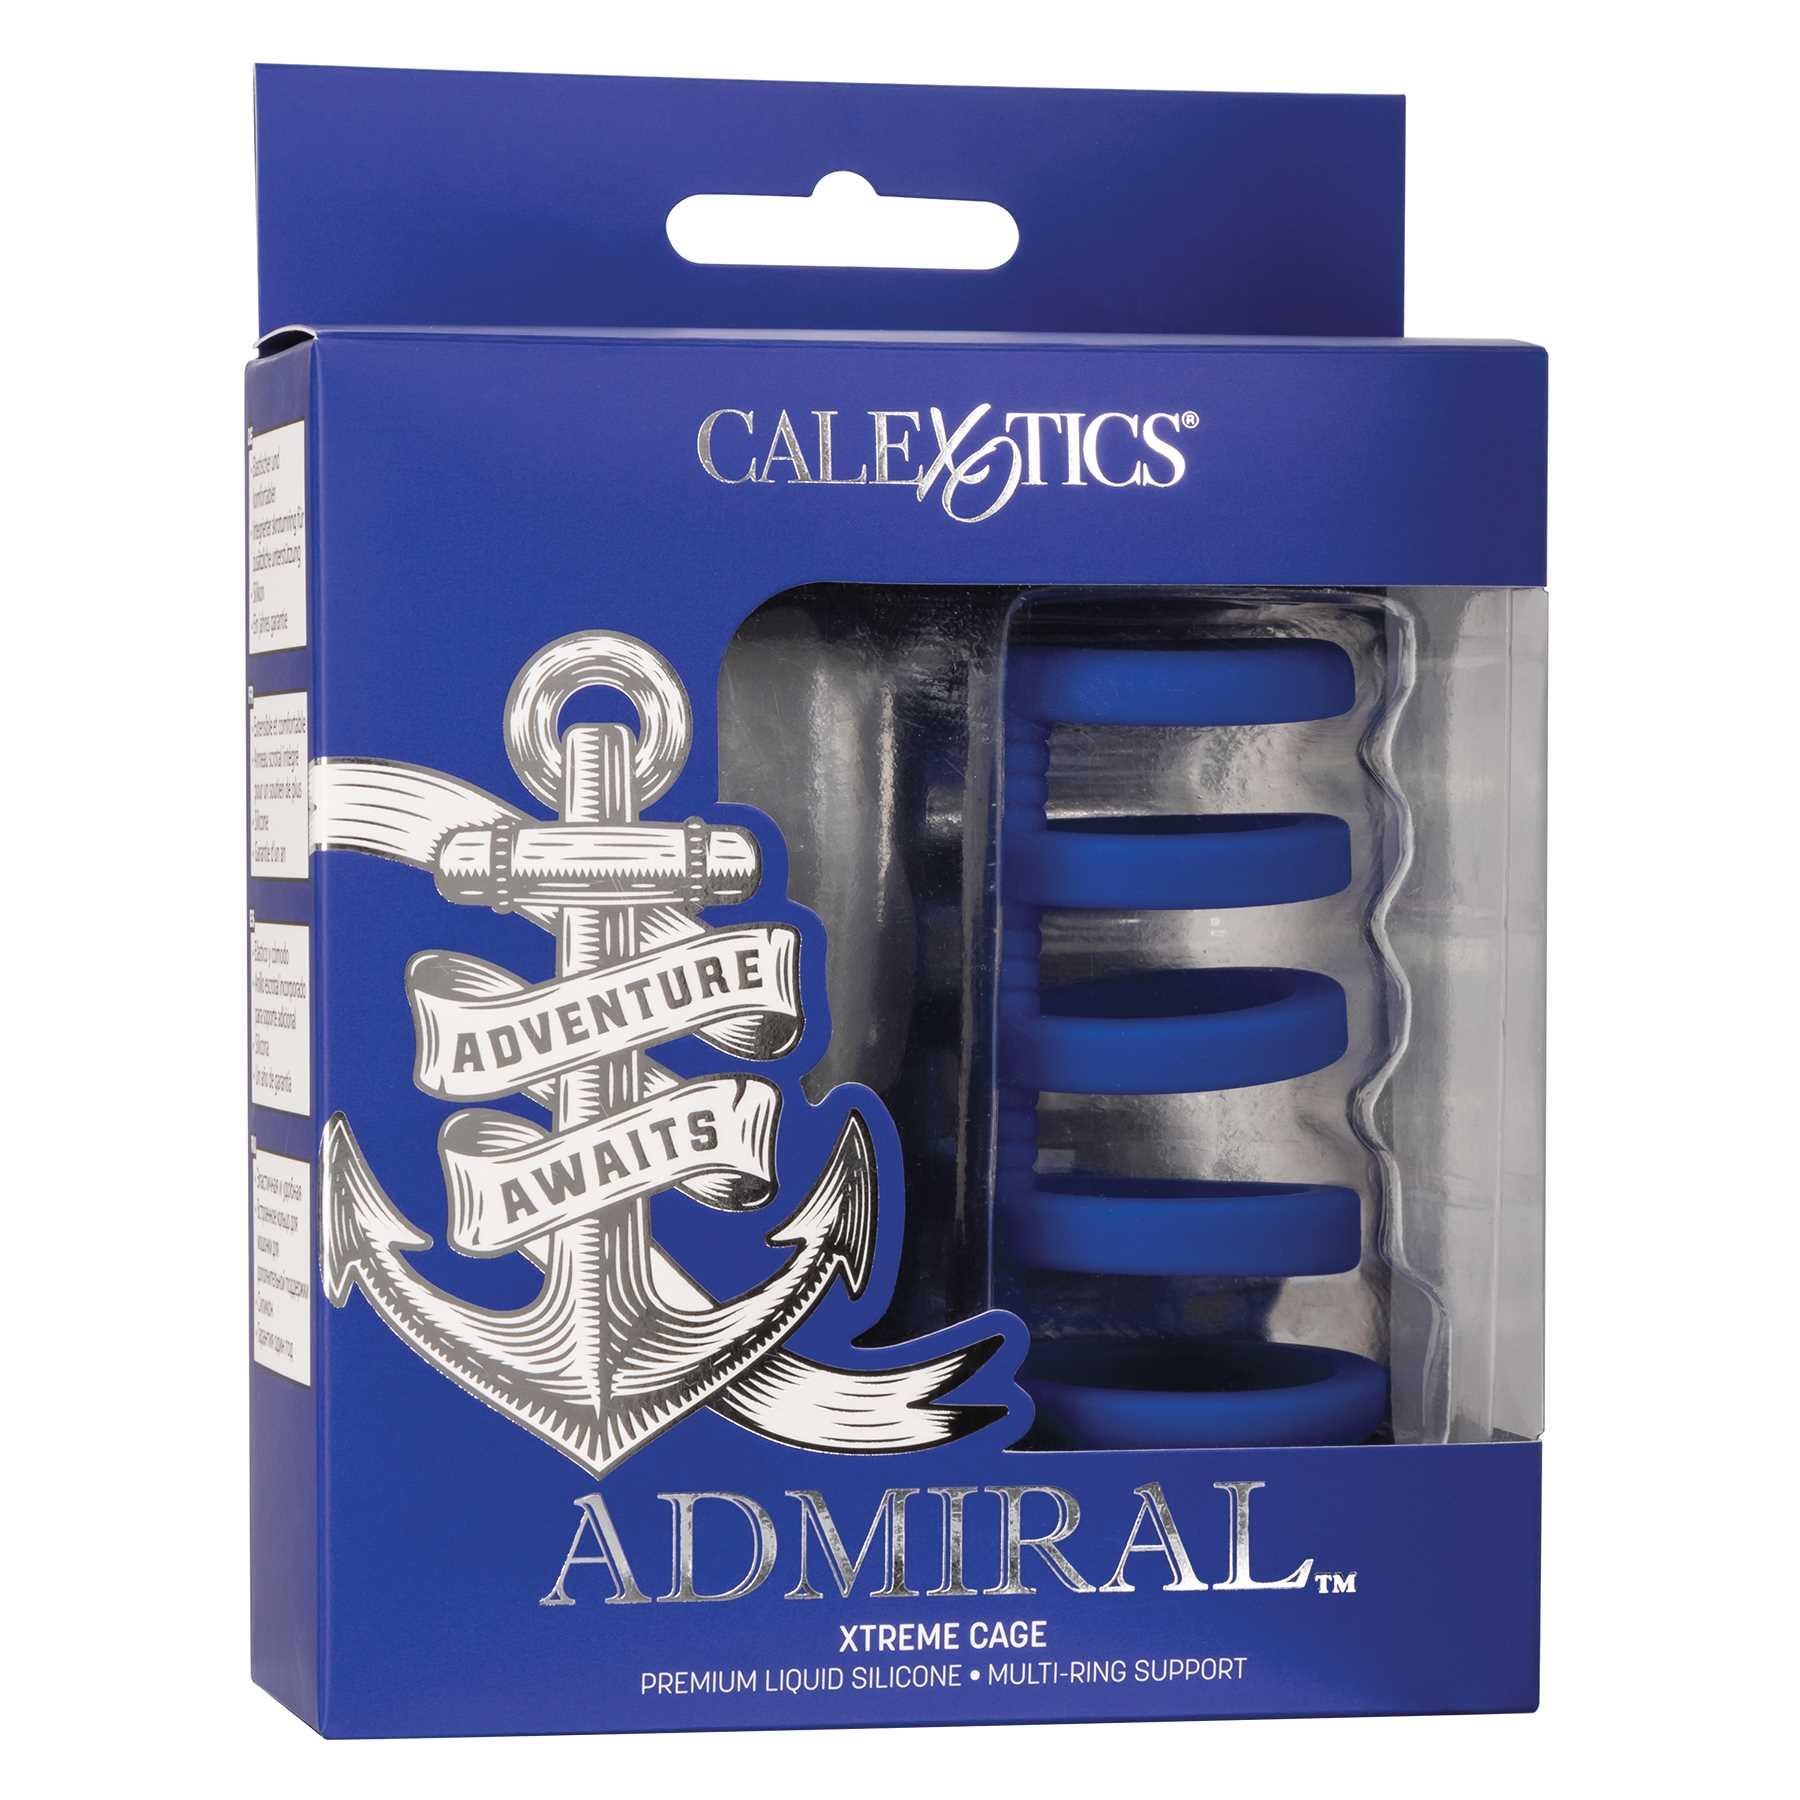 Admiral Xtreme Cock Cage front box packaging